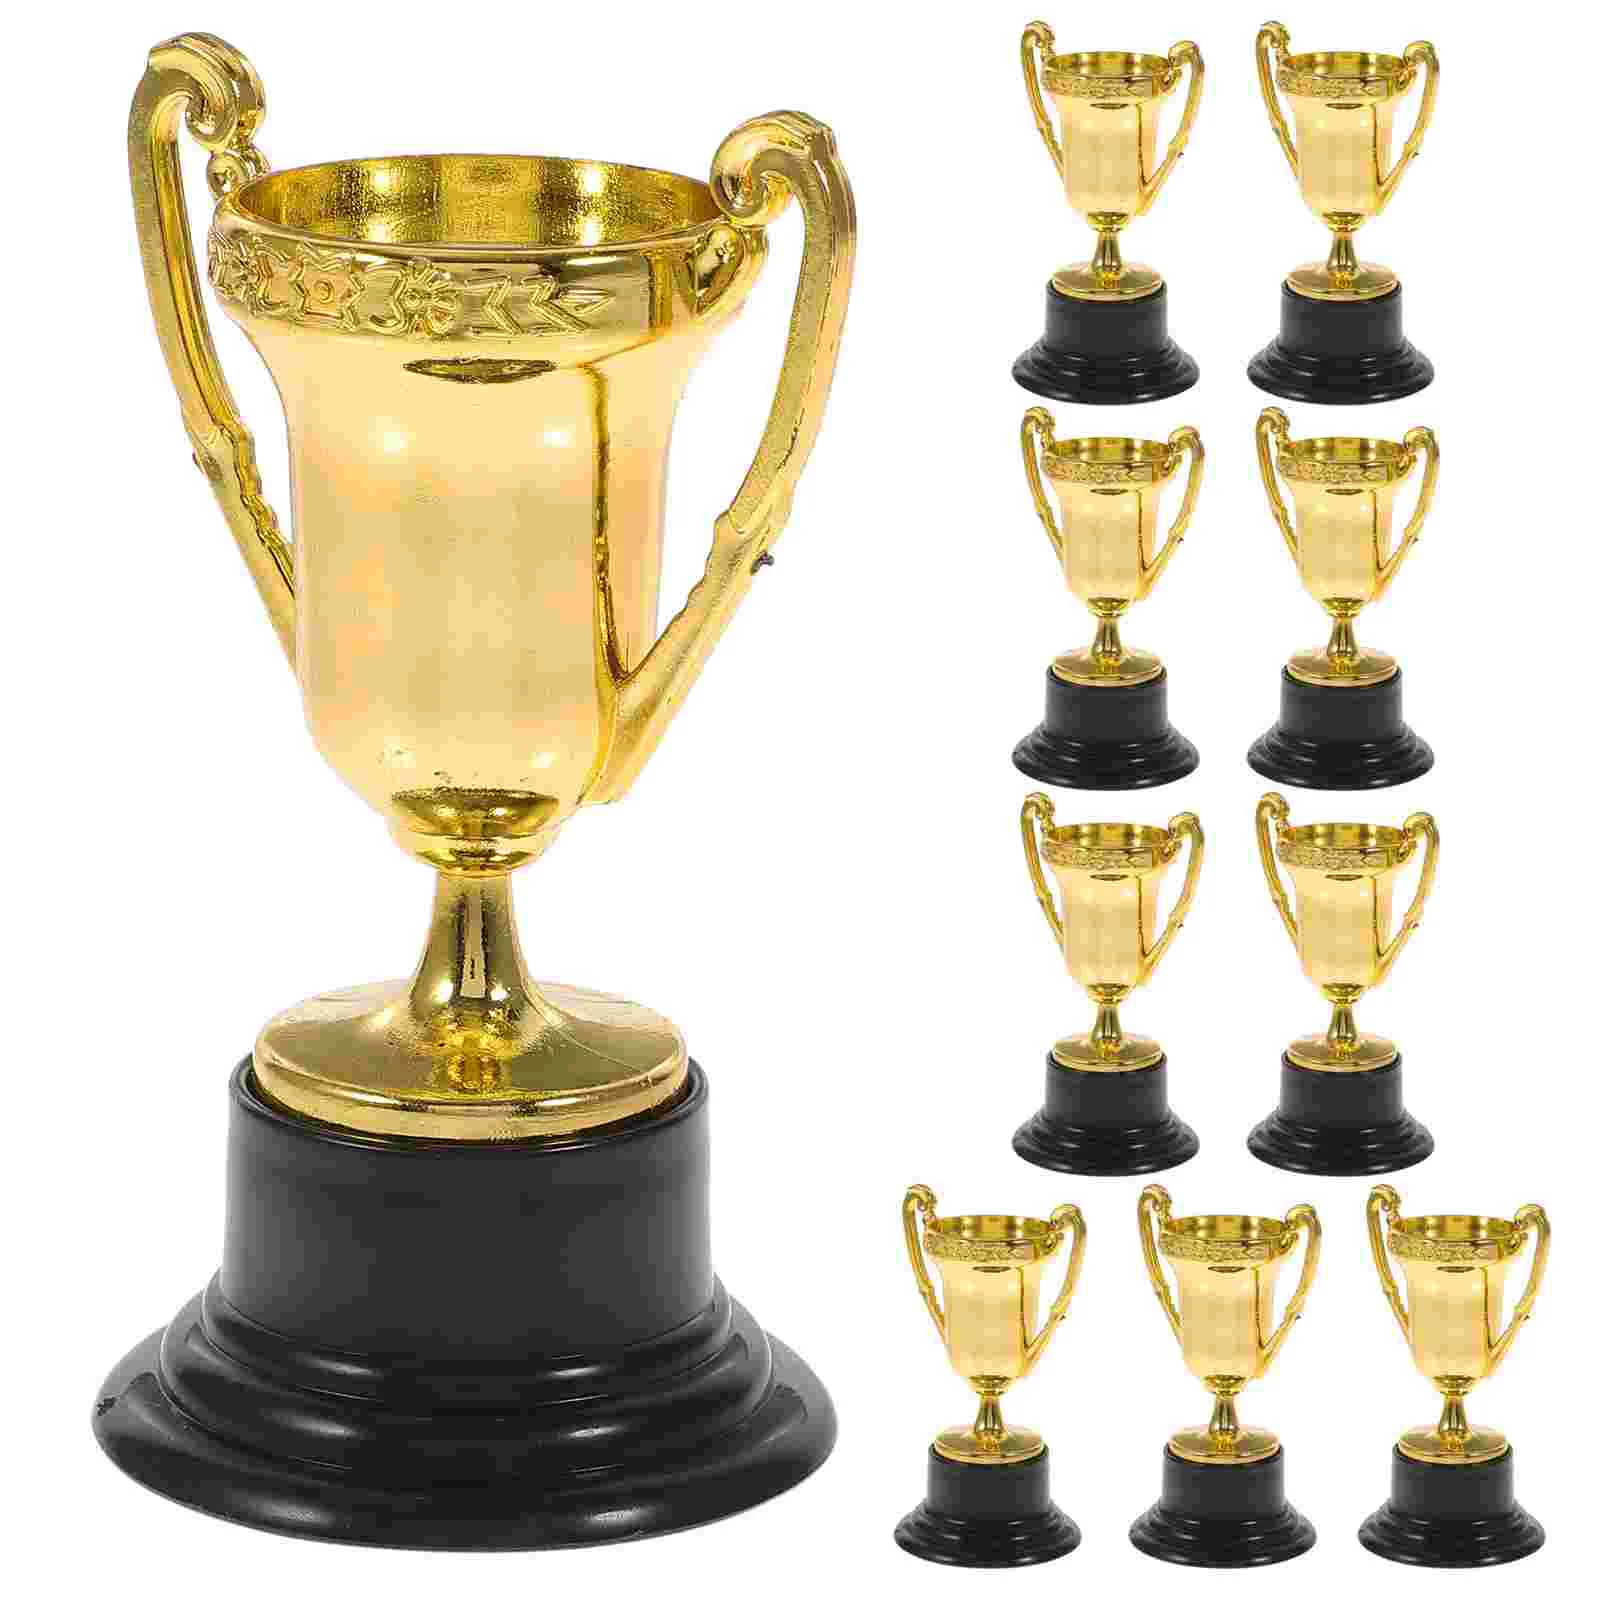 

10pcs trophies for kids, small trophy bulk set for party favors, props, rewards, winning prizes, competitions for kids and